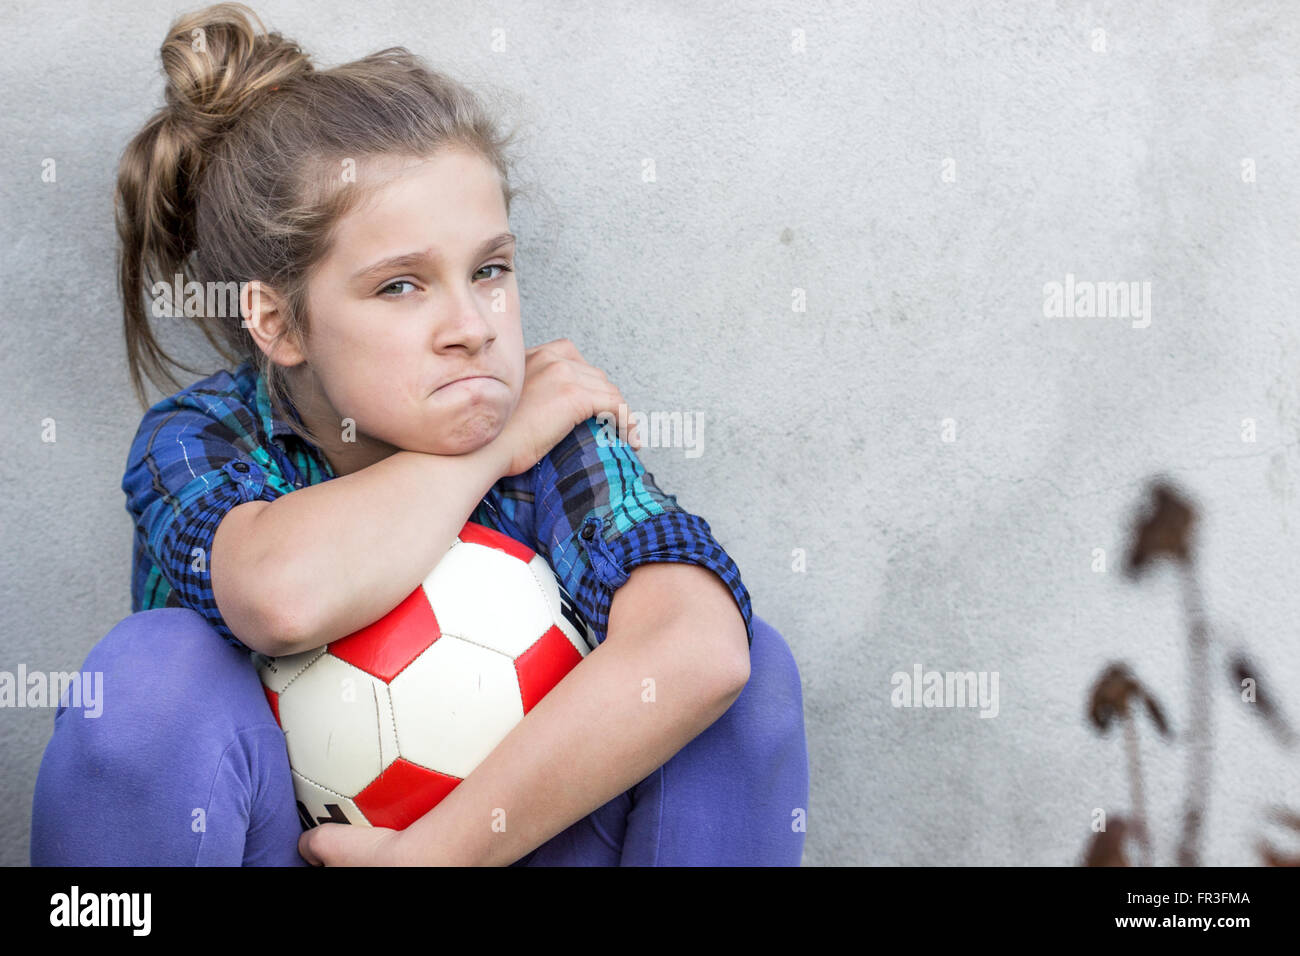 A young girl holds a ball angrily fixed Stock Photo